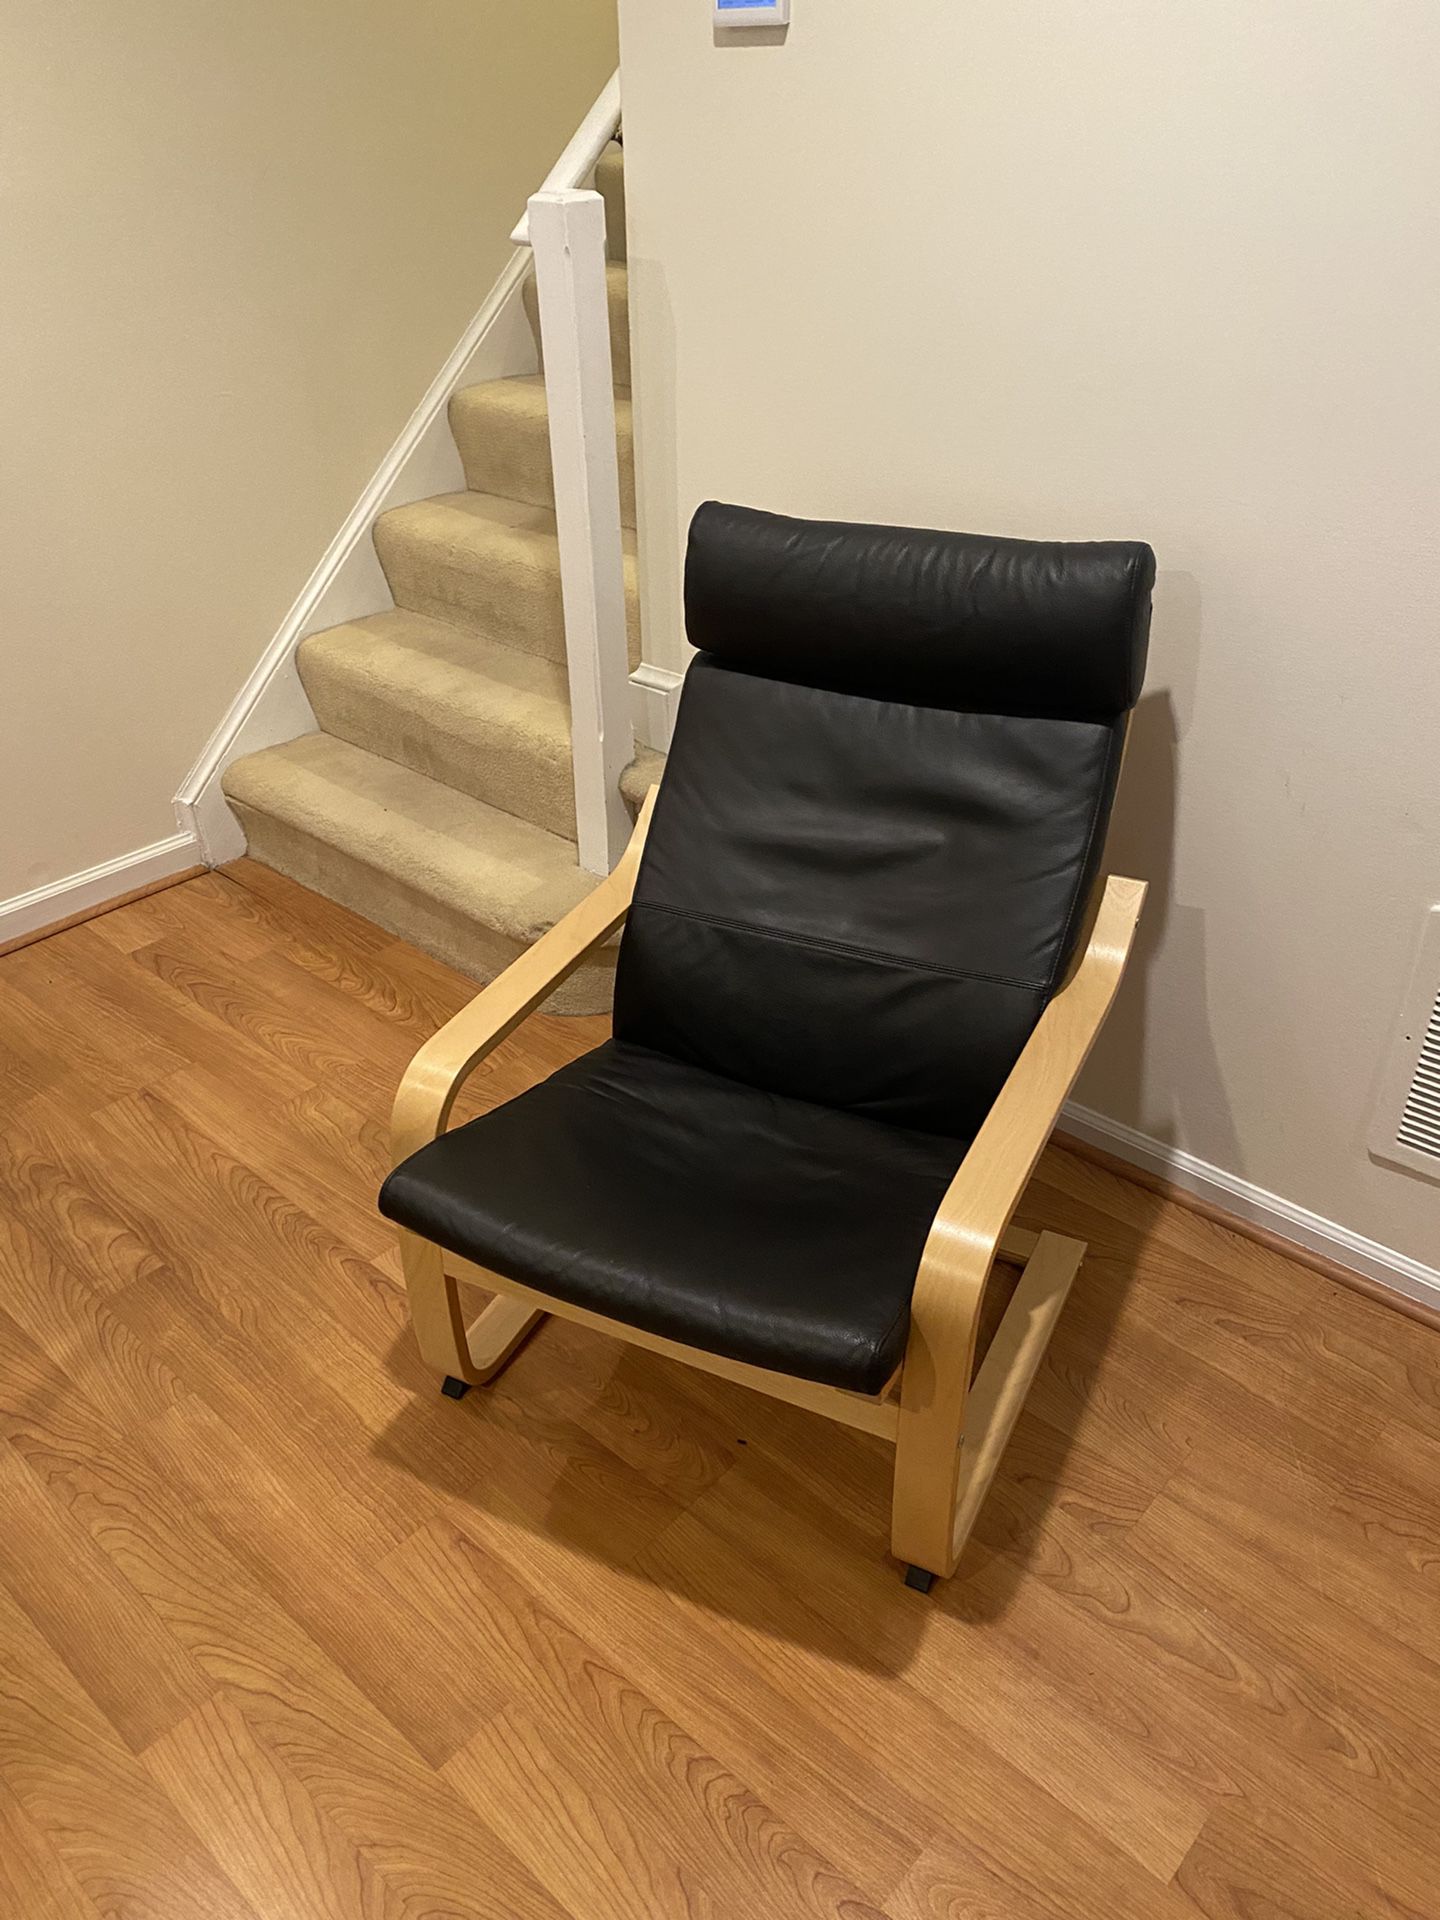 Leather IKEA Poang chair for $7.99 at GW! : r/ThriftStoreHauls